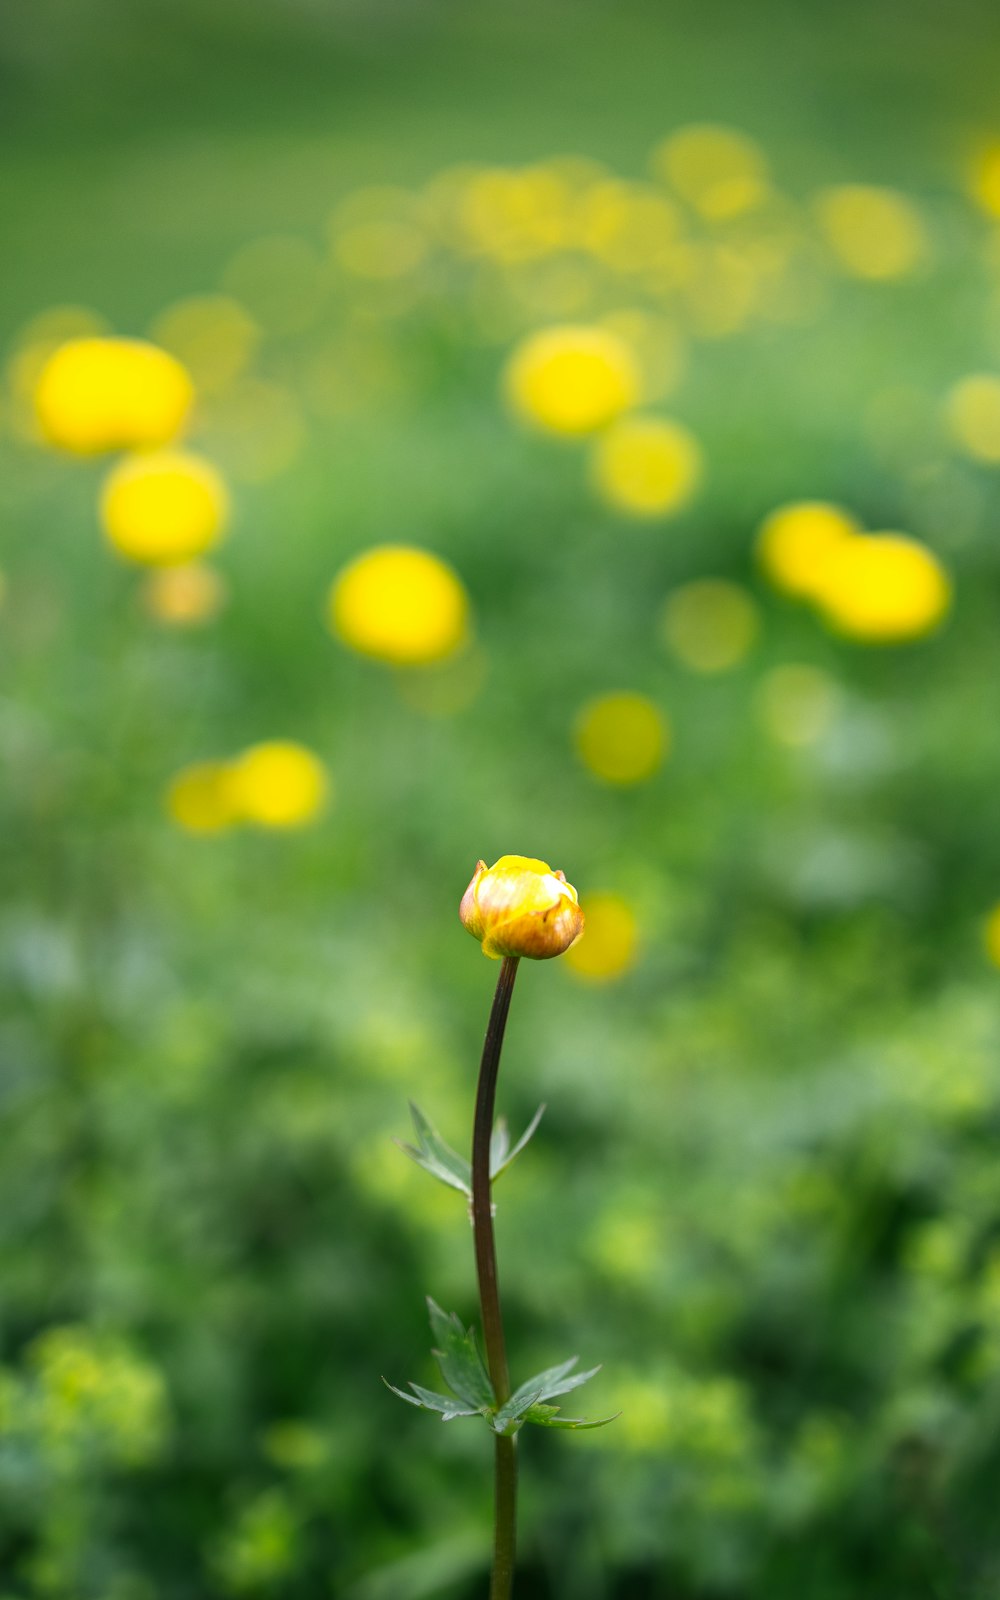 a single yellow flower in a field of yellow flowers